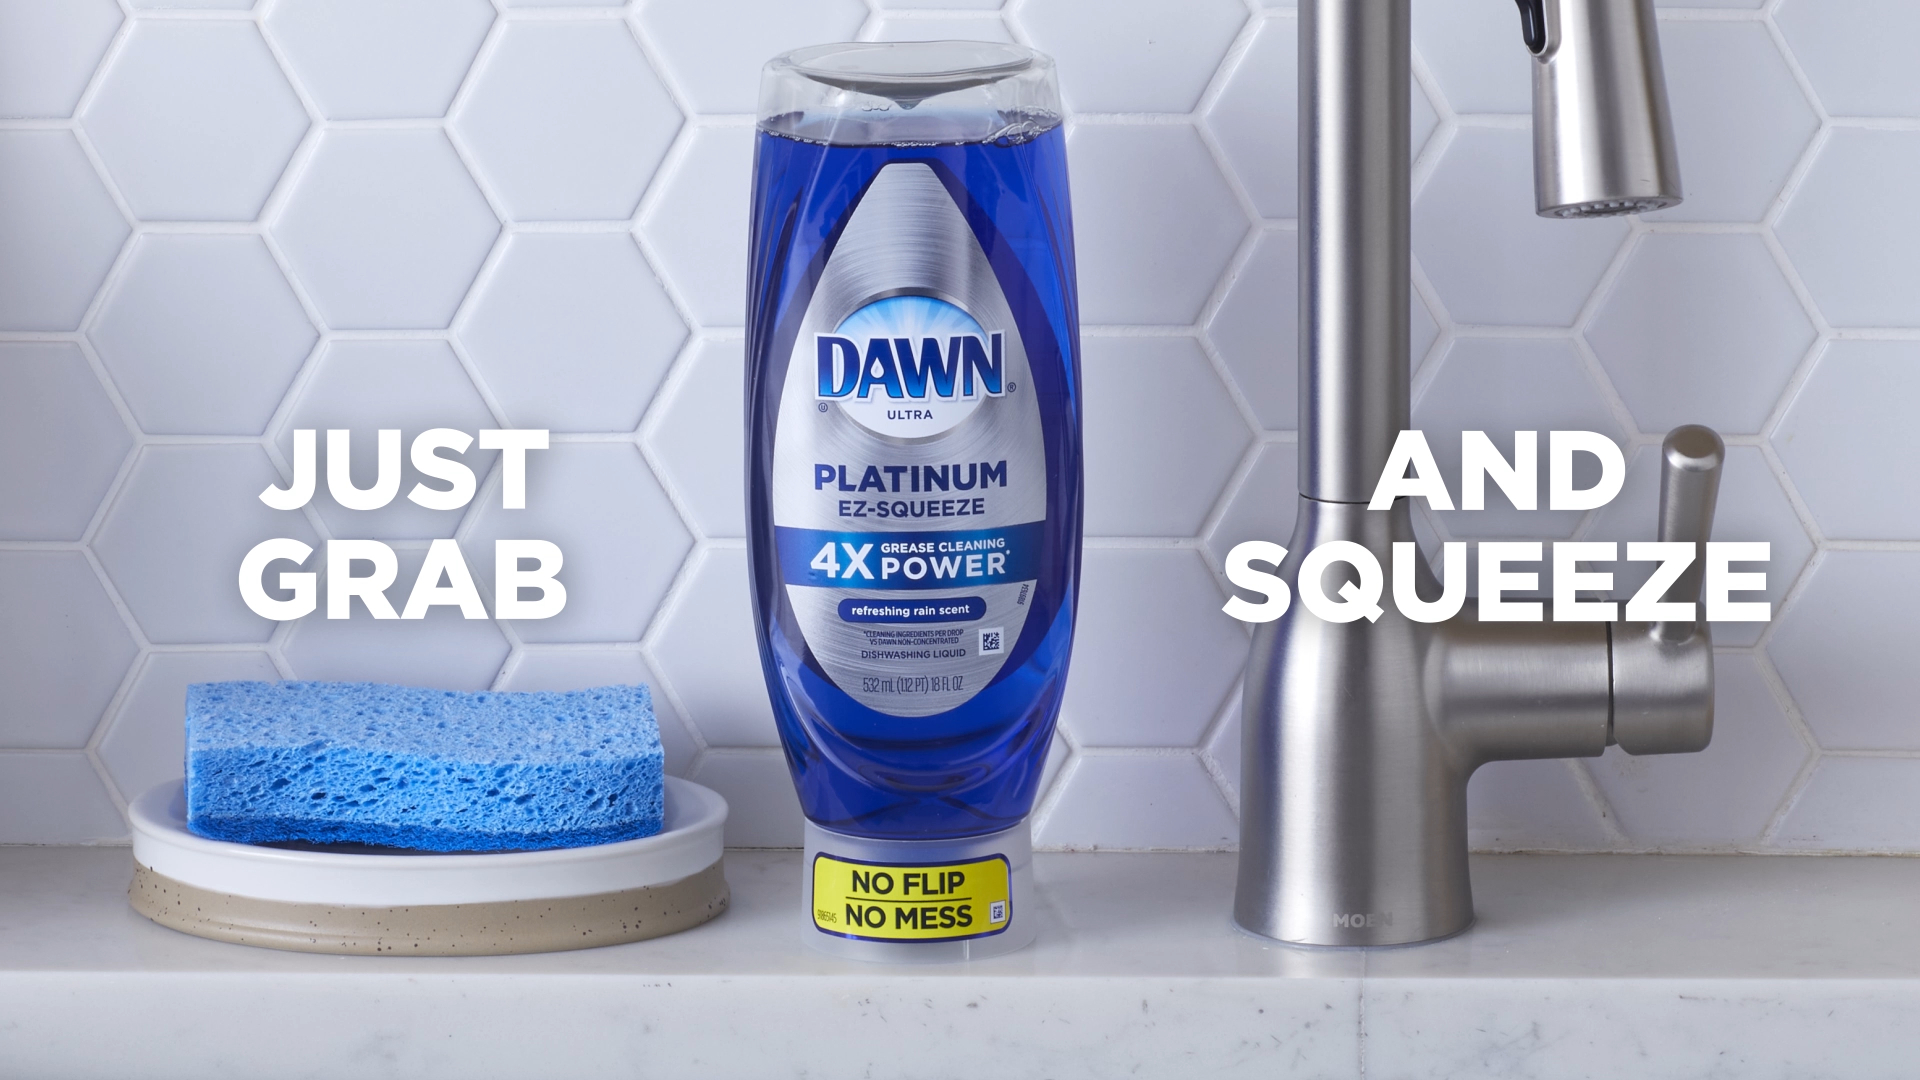 5 Ways To Use Dawn Dish Soap You Never Knew About - Tastefully Frugal